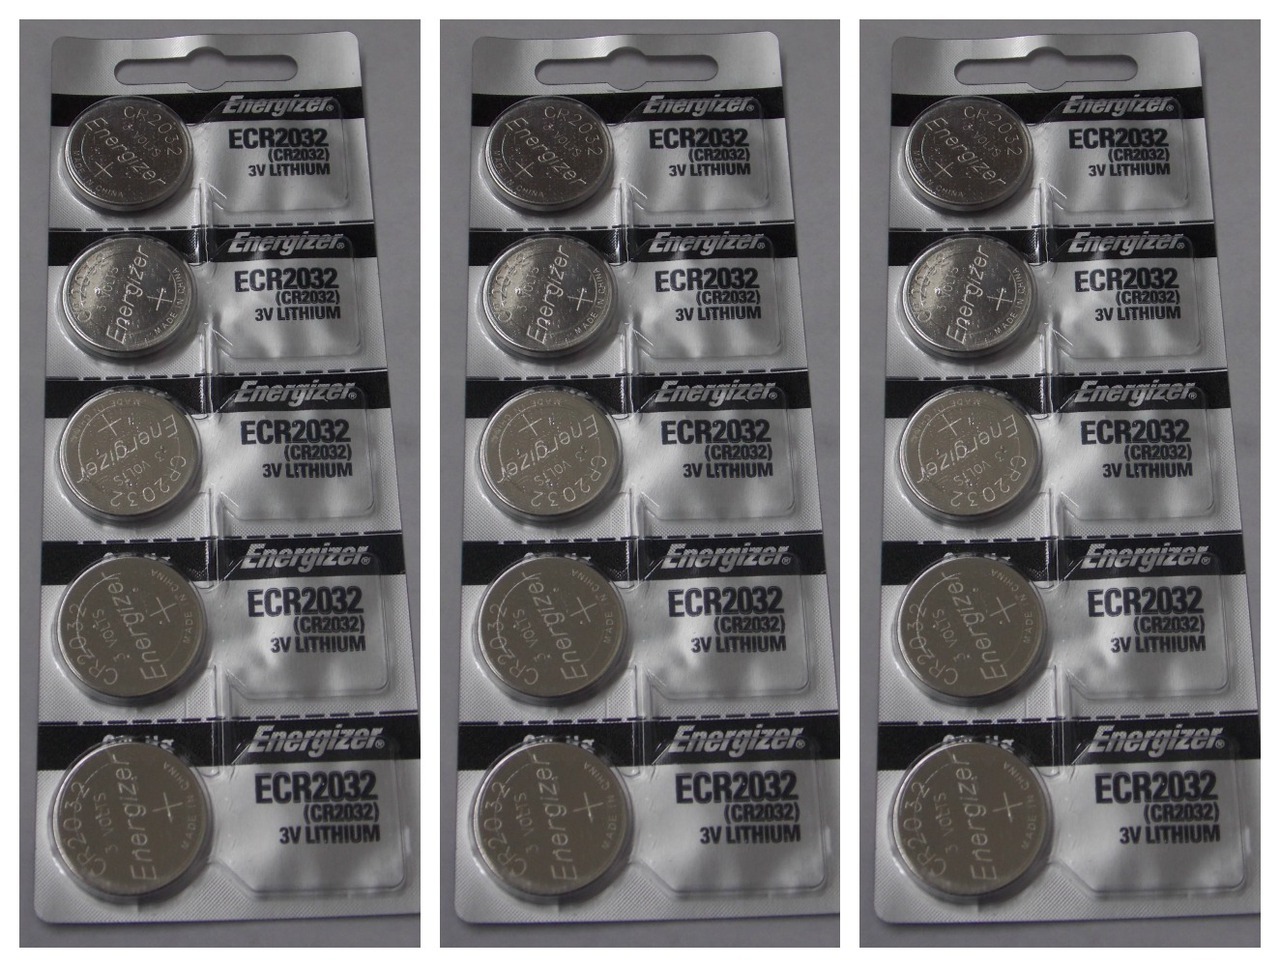 Energizer CR2032 3V Lithium Coin Battery - 15 Pack + FREE SHIPPING